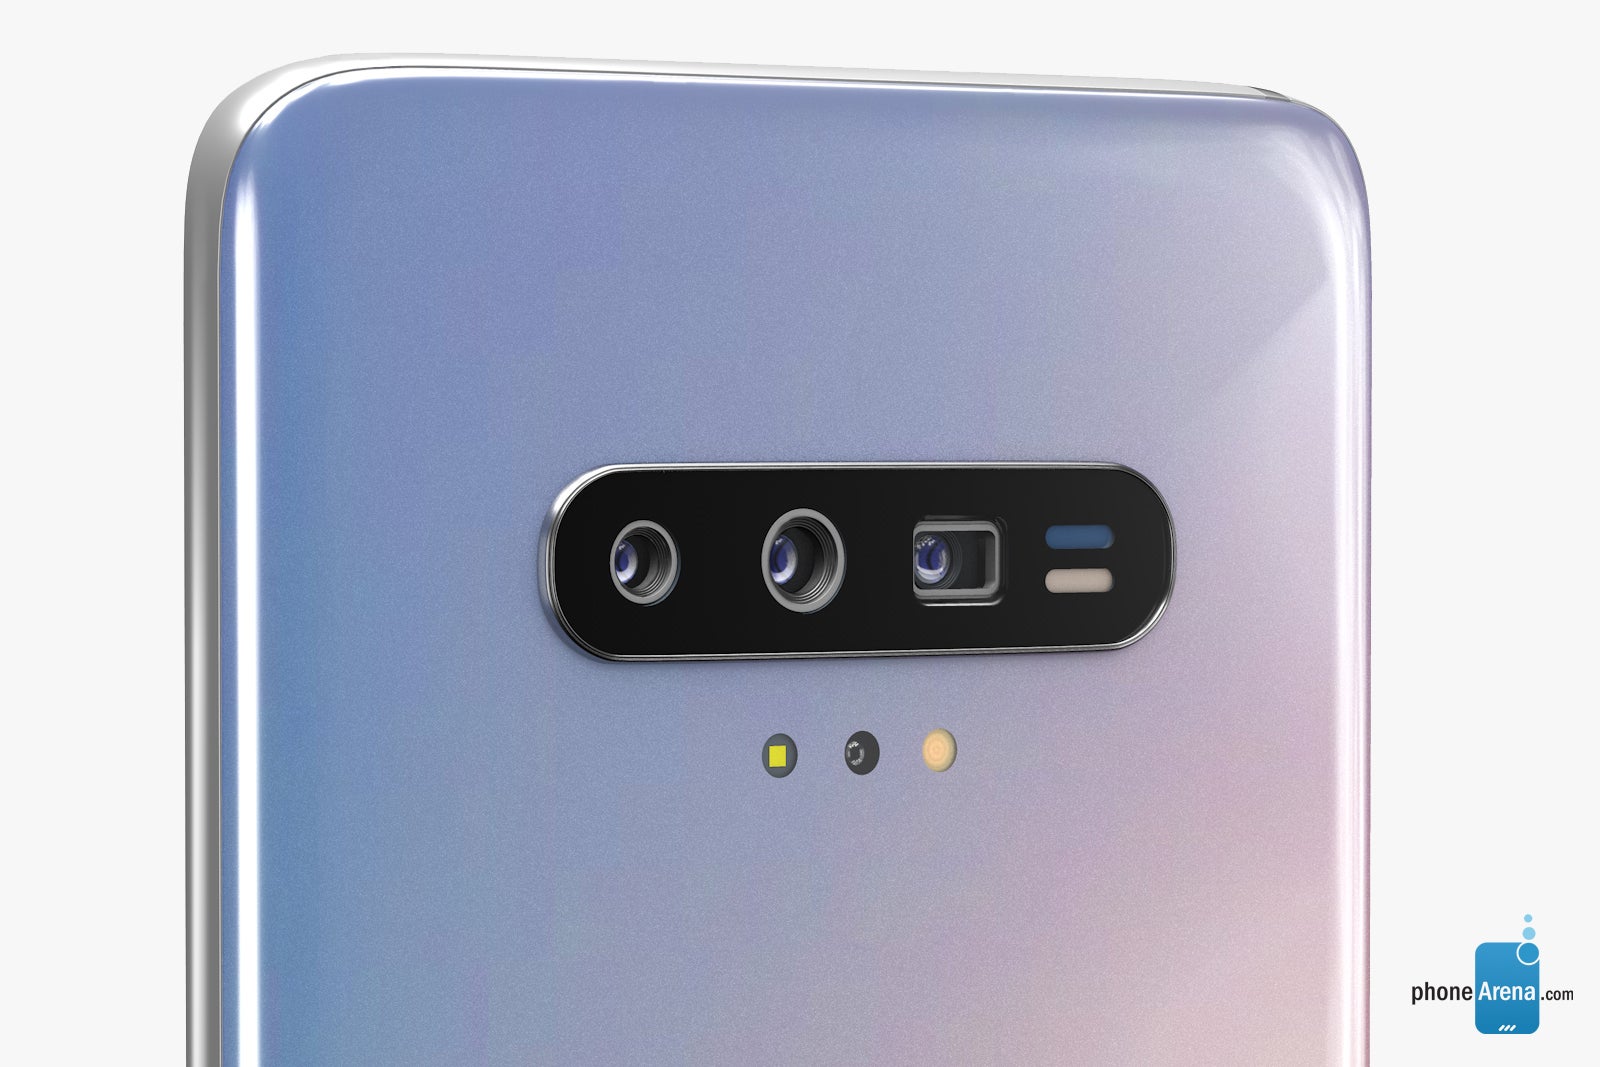 The Samsung Galaxy S11's design has reportedly been finalized